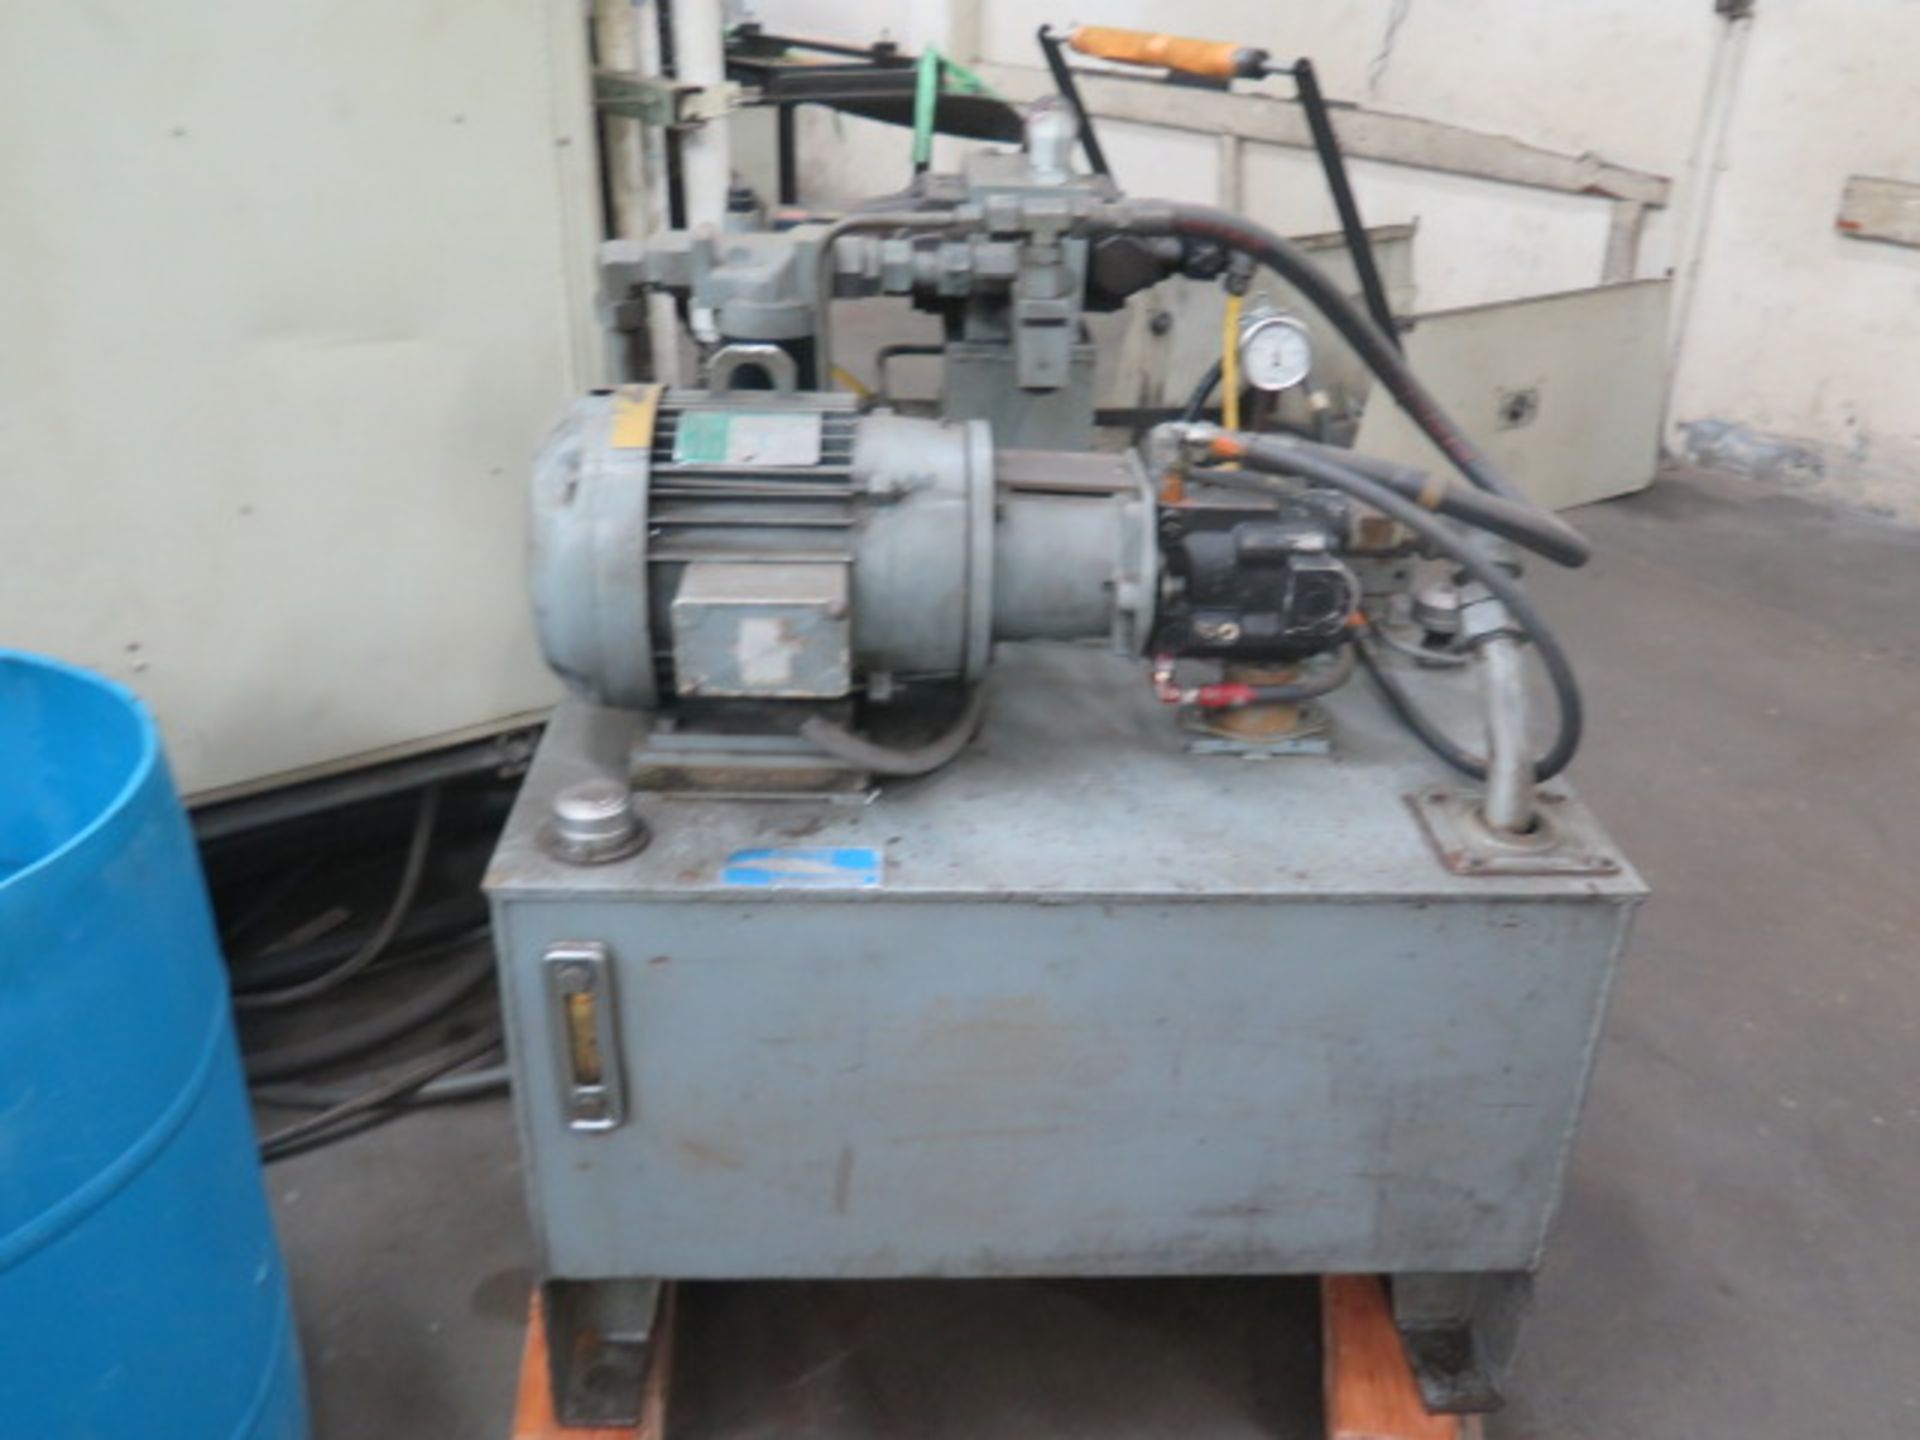 Sencorp Systems mdl. 2200 Thermoforming s/n 92214295 w/ Sencorp Controls, Film Preheater, SOLD AS IS - Image 28 of 28